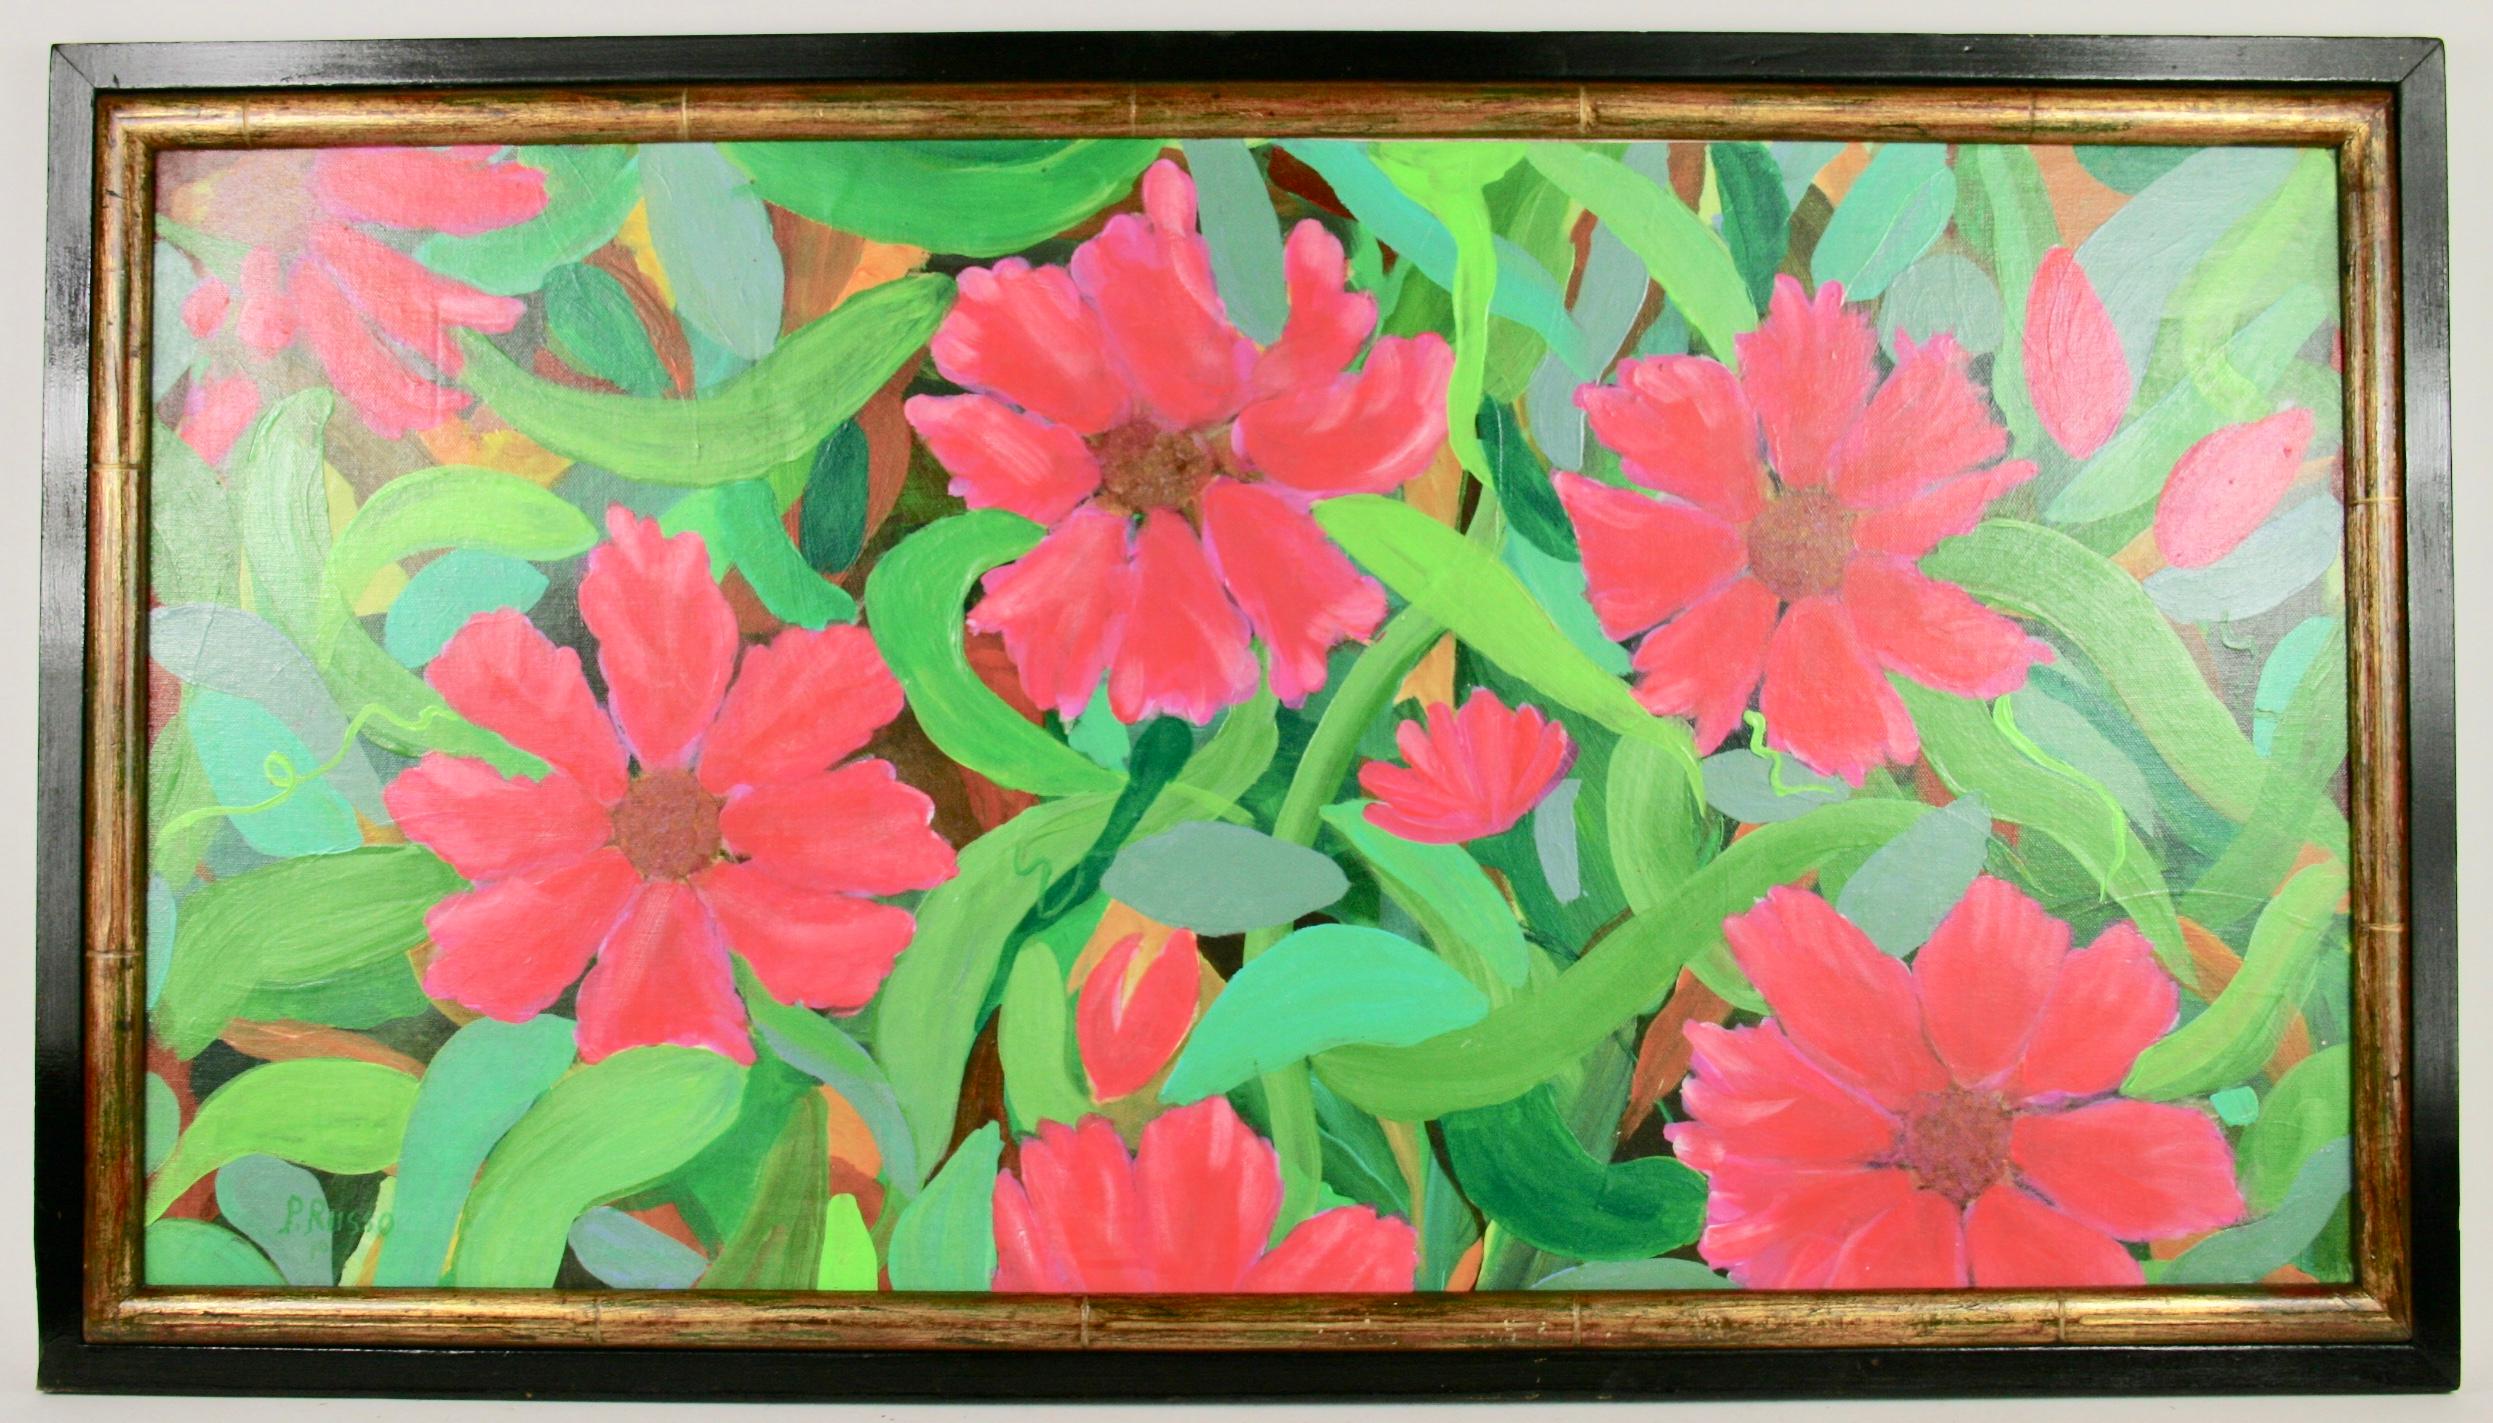 5-3048 Oversized acrylic  floral painting on canvas applied to board
Set in a vintage wood frame
Neapolitan artist P. Russo